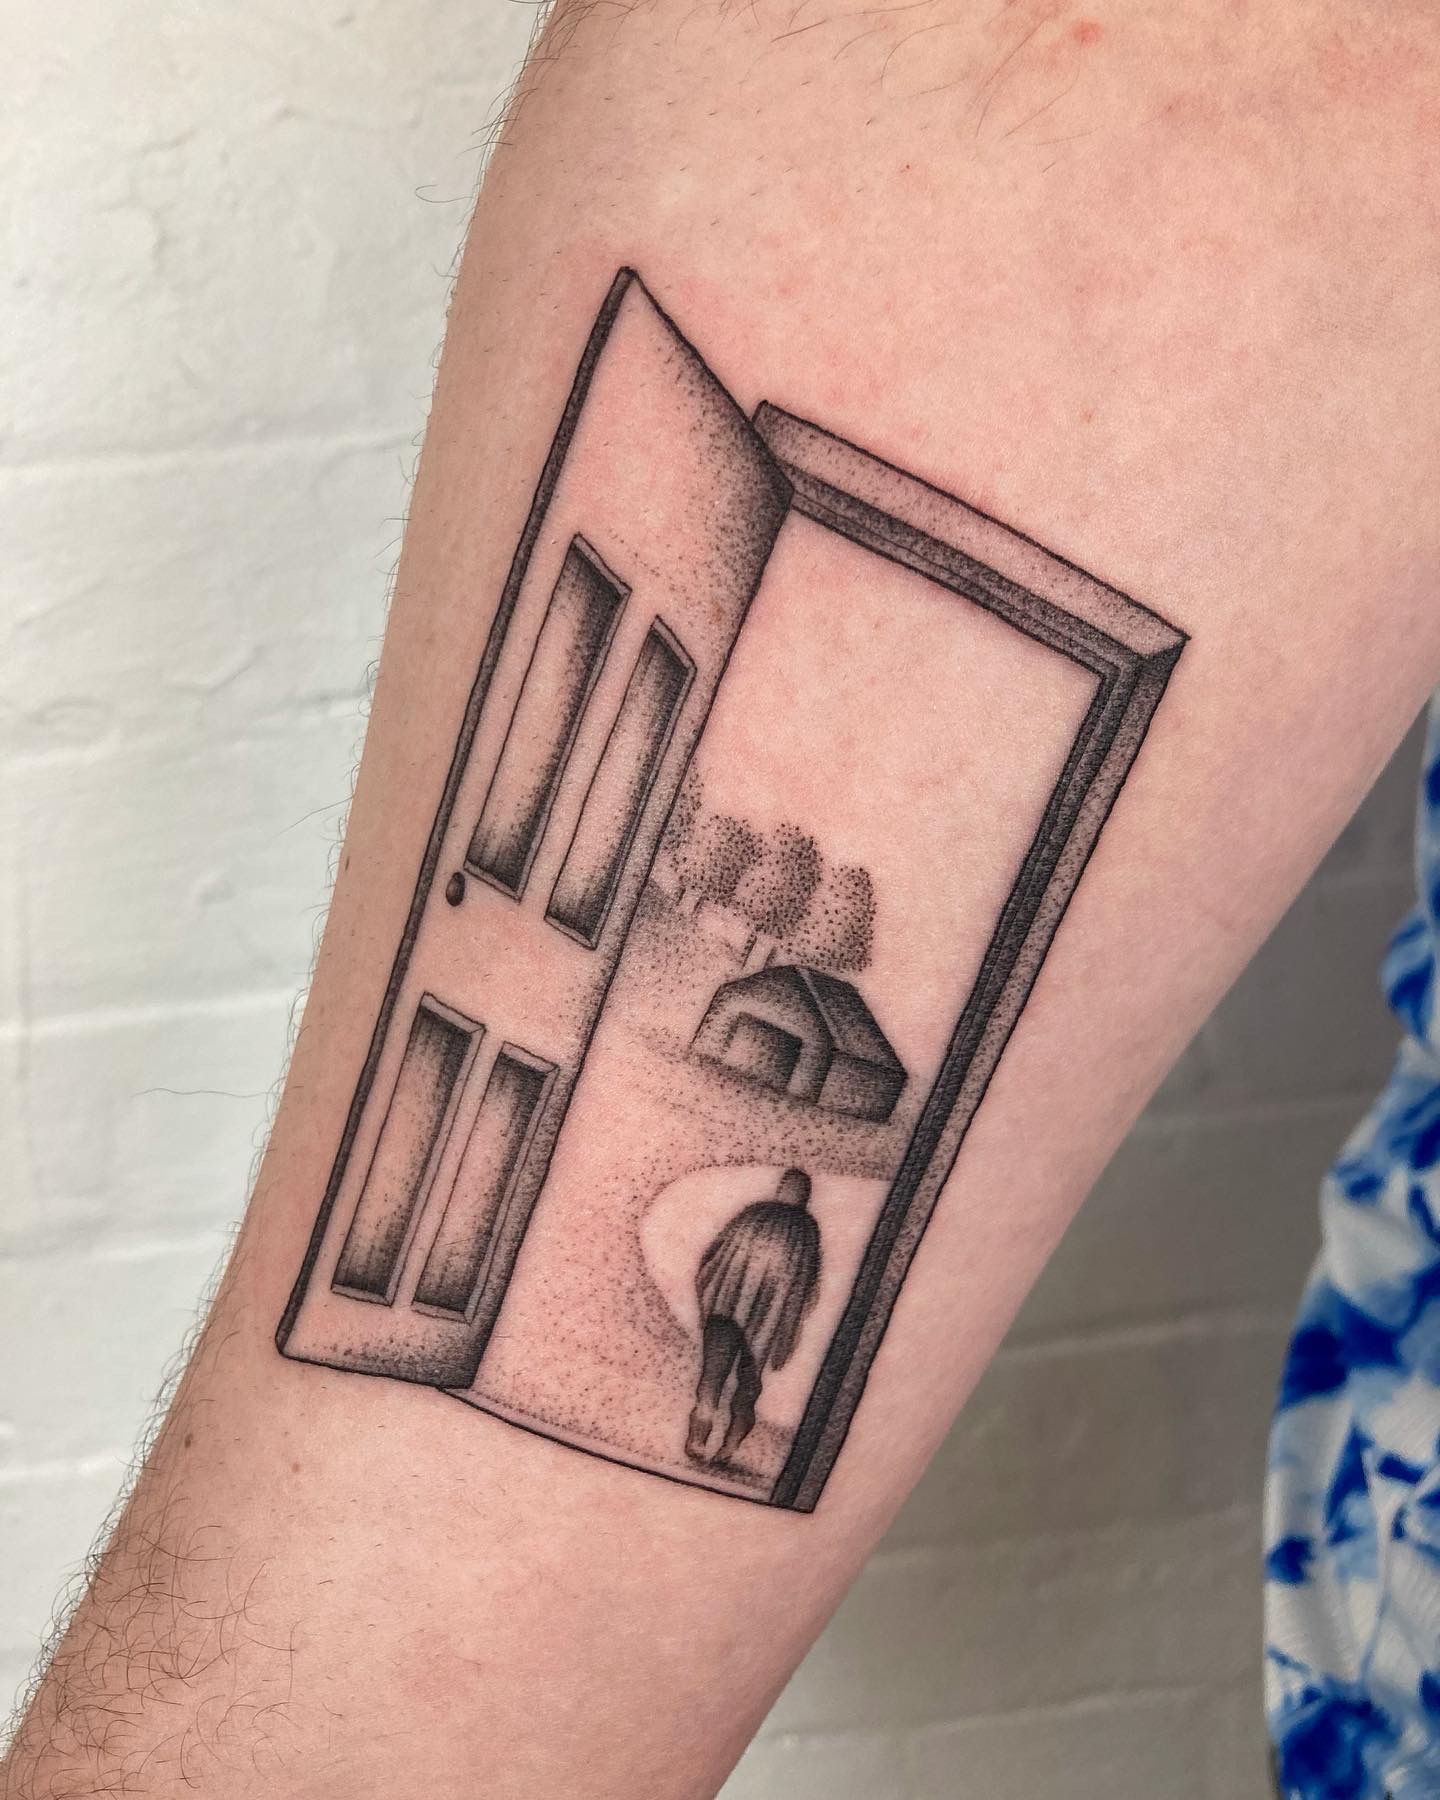 First tattoo Wish you were here album cover by Noel C at Allied Tattoo in  Brooklyn NY  rtattoos